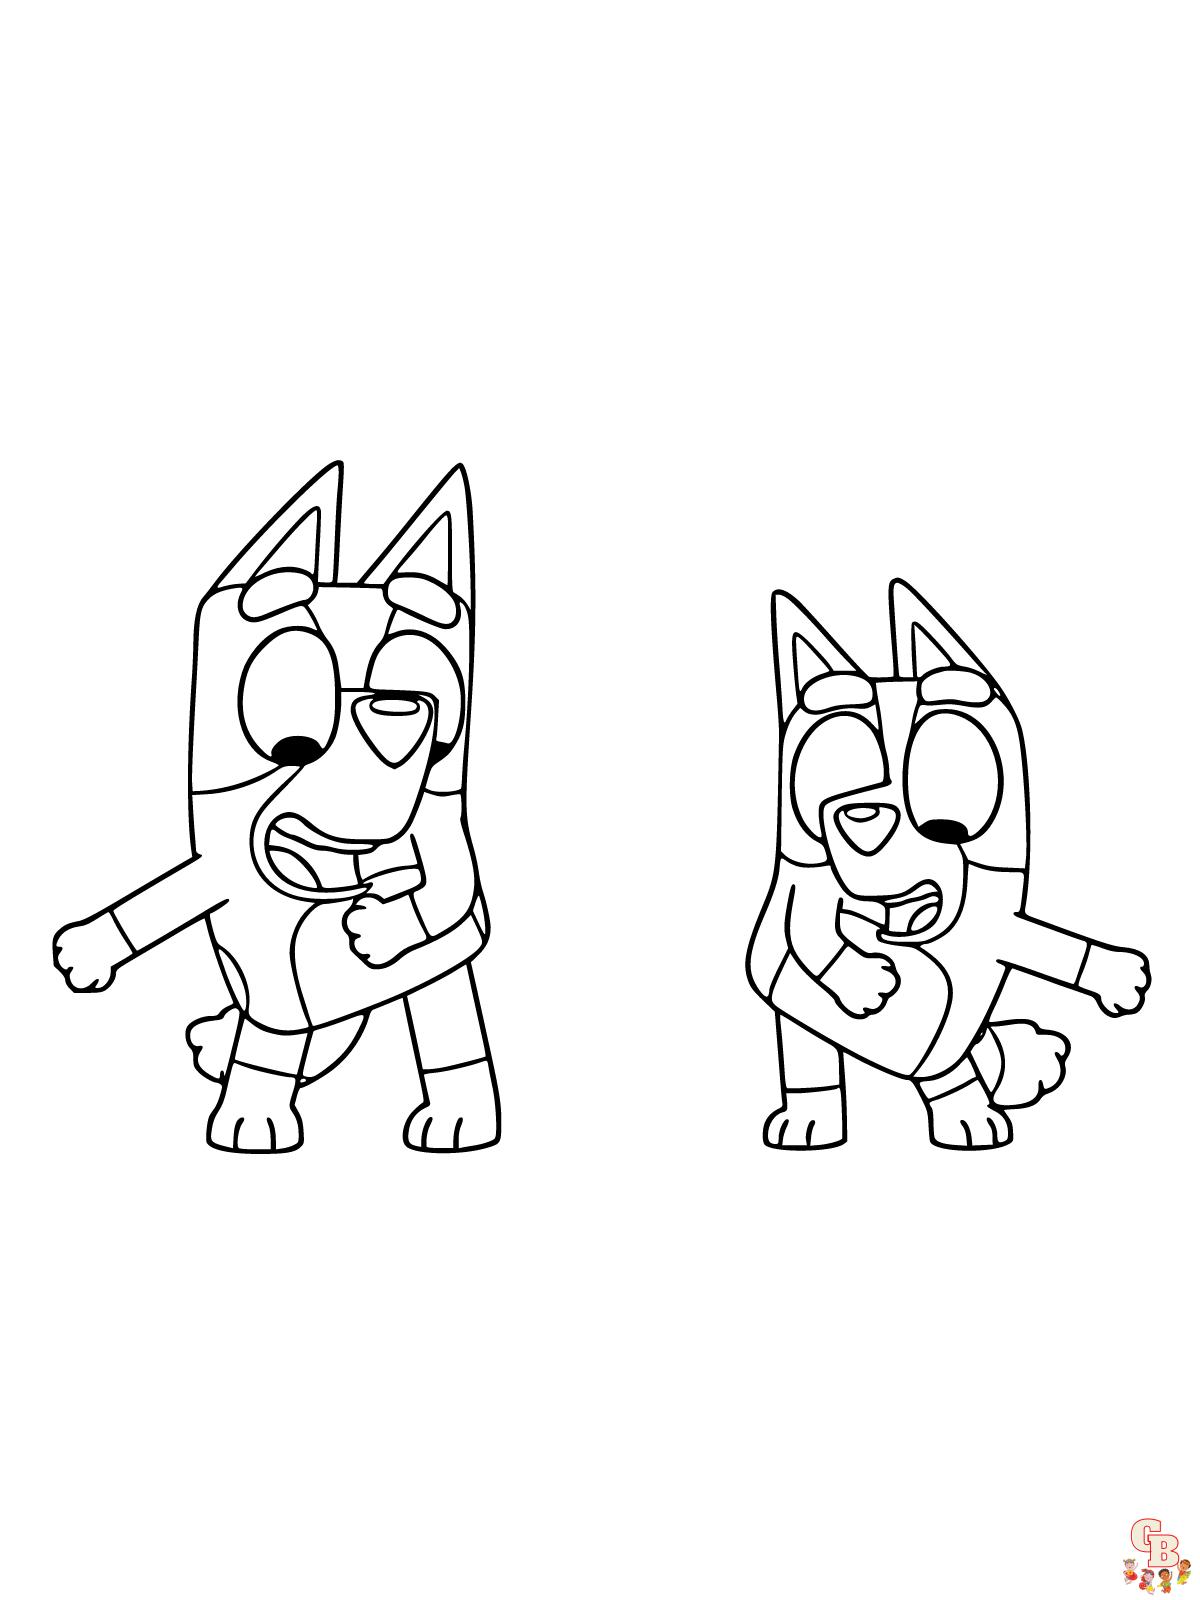 bingo and bluey coloring sheets